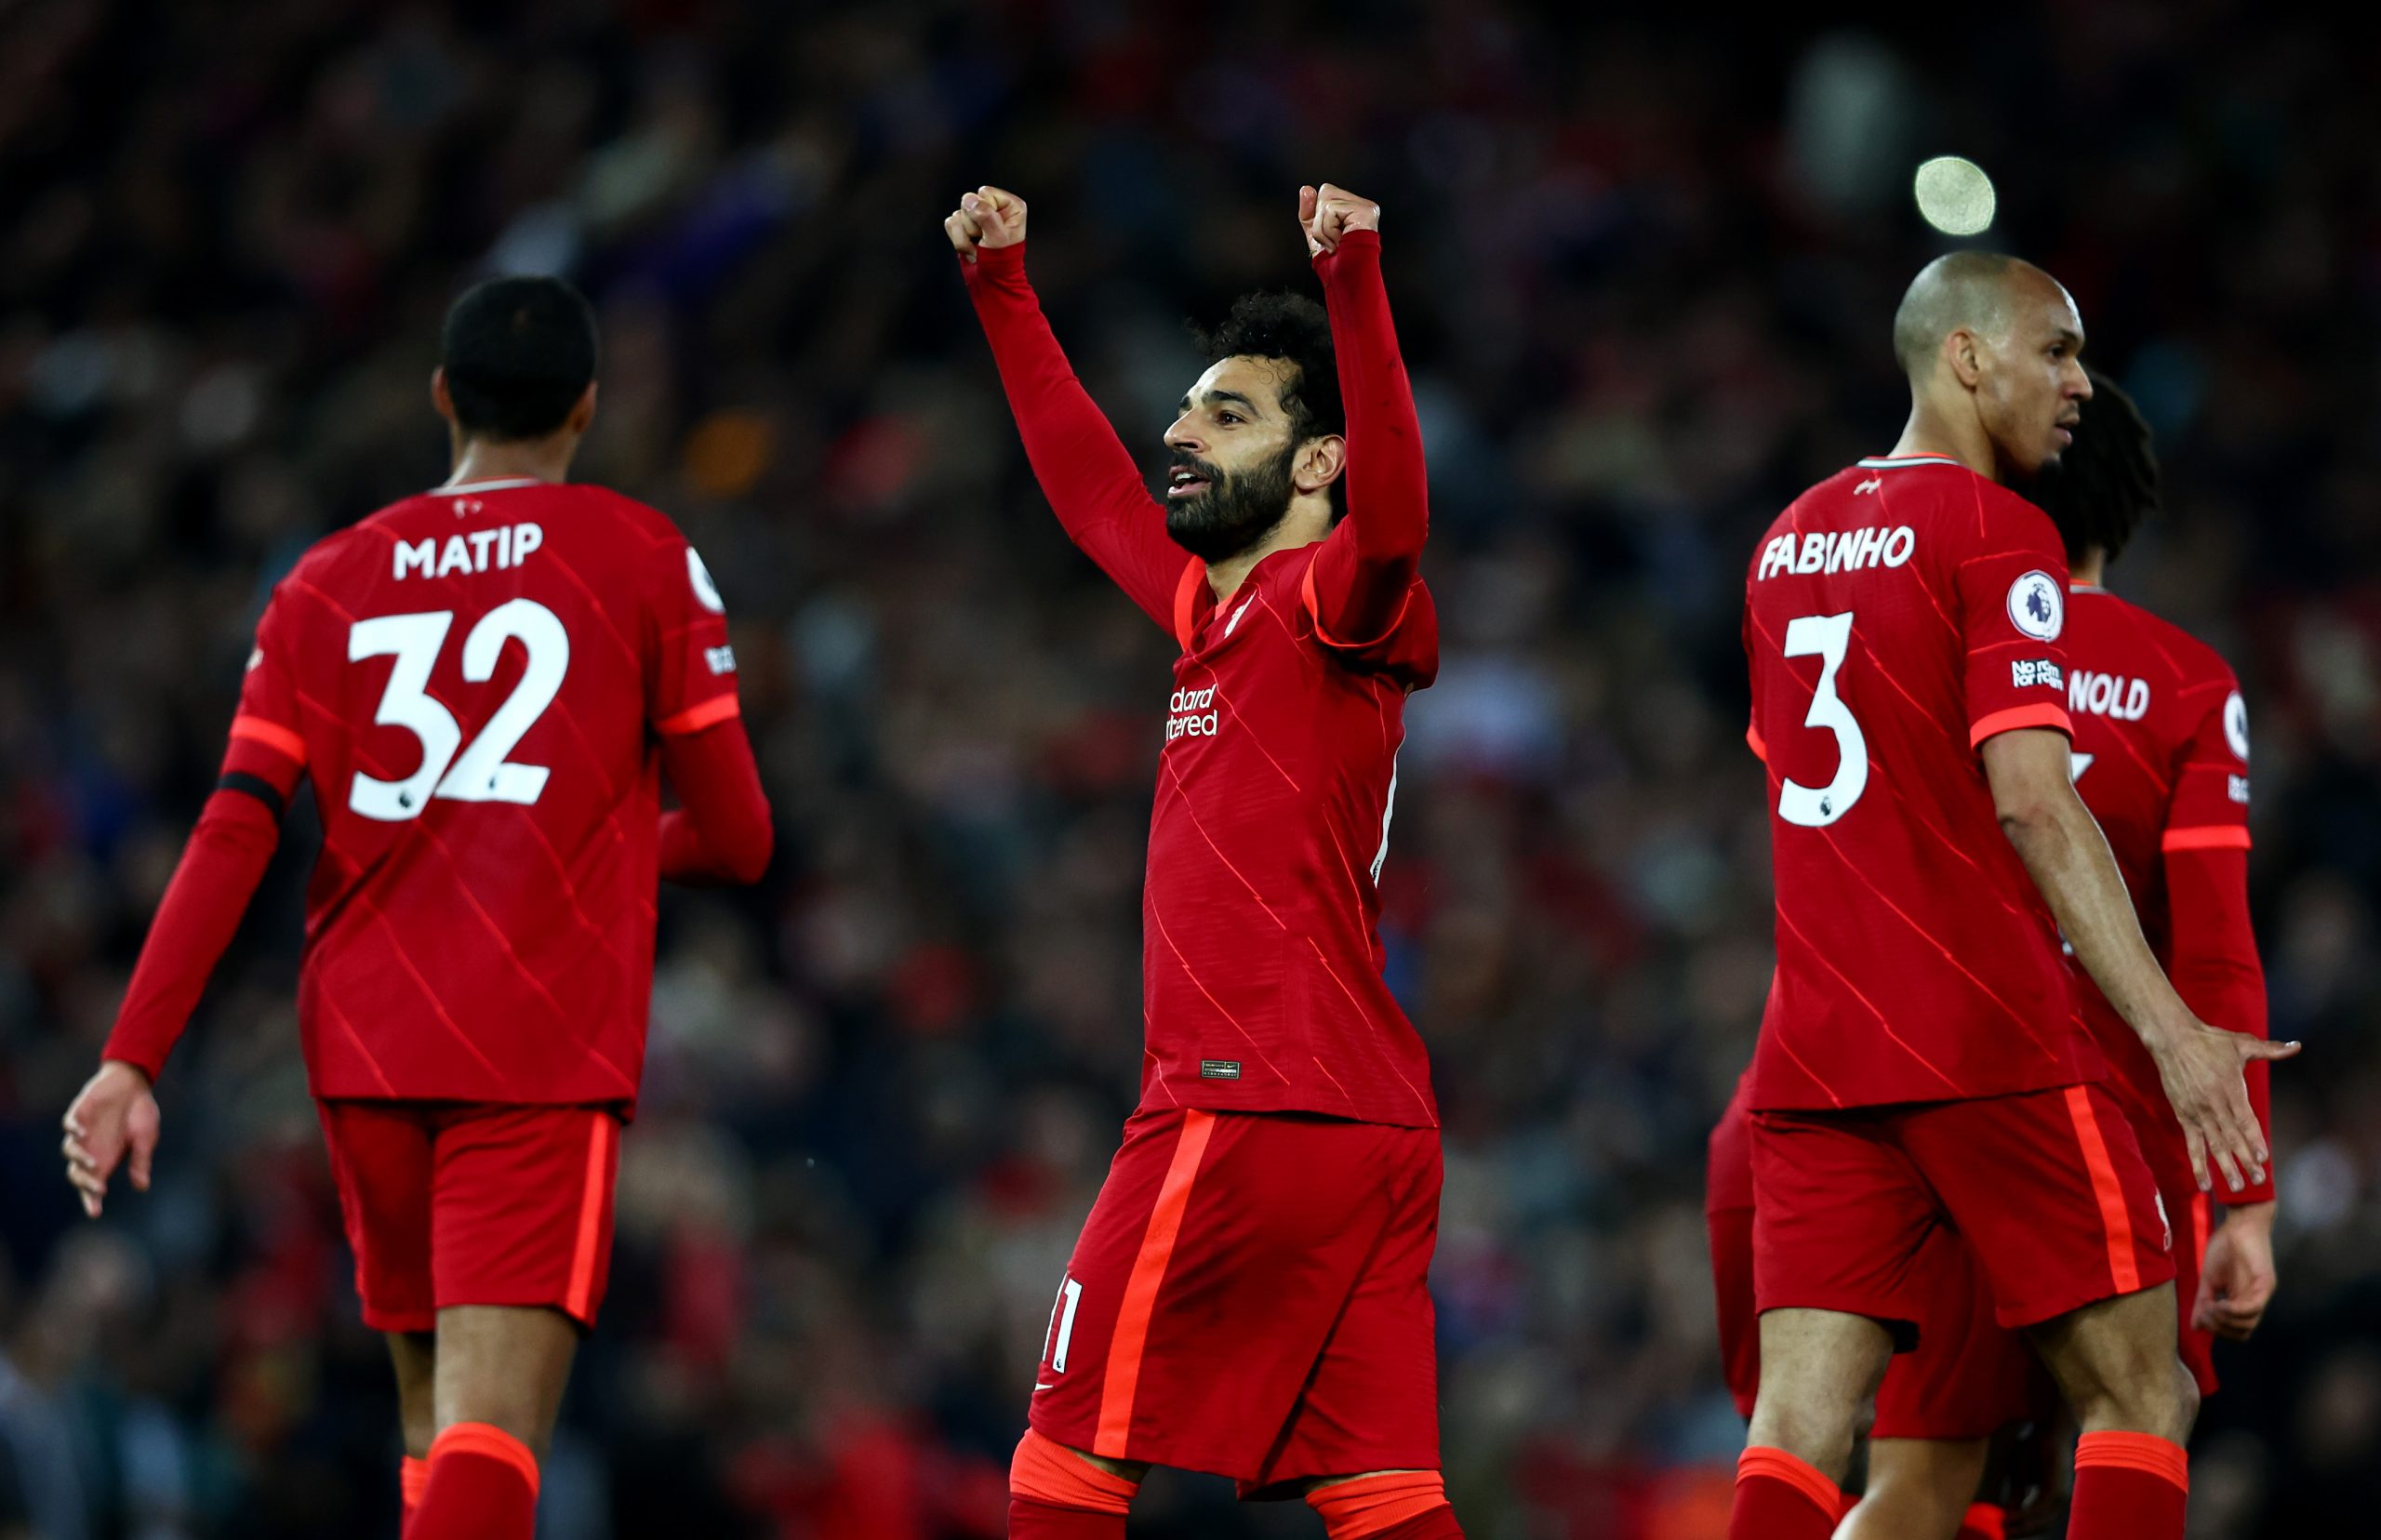 Mohamed Salah of Liverpool linked to Real Madrid